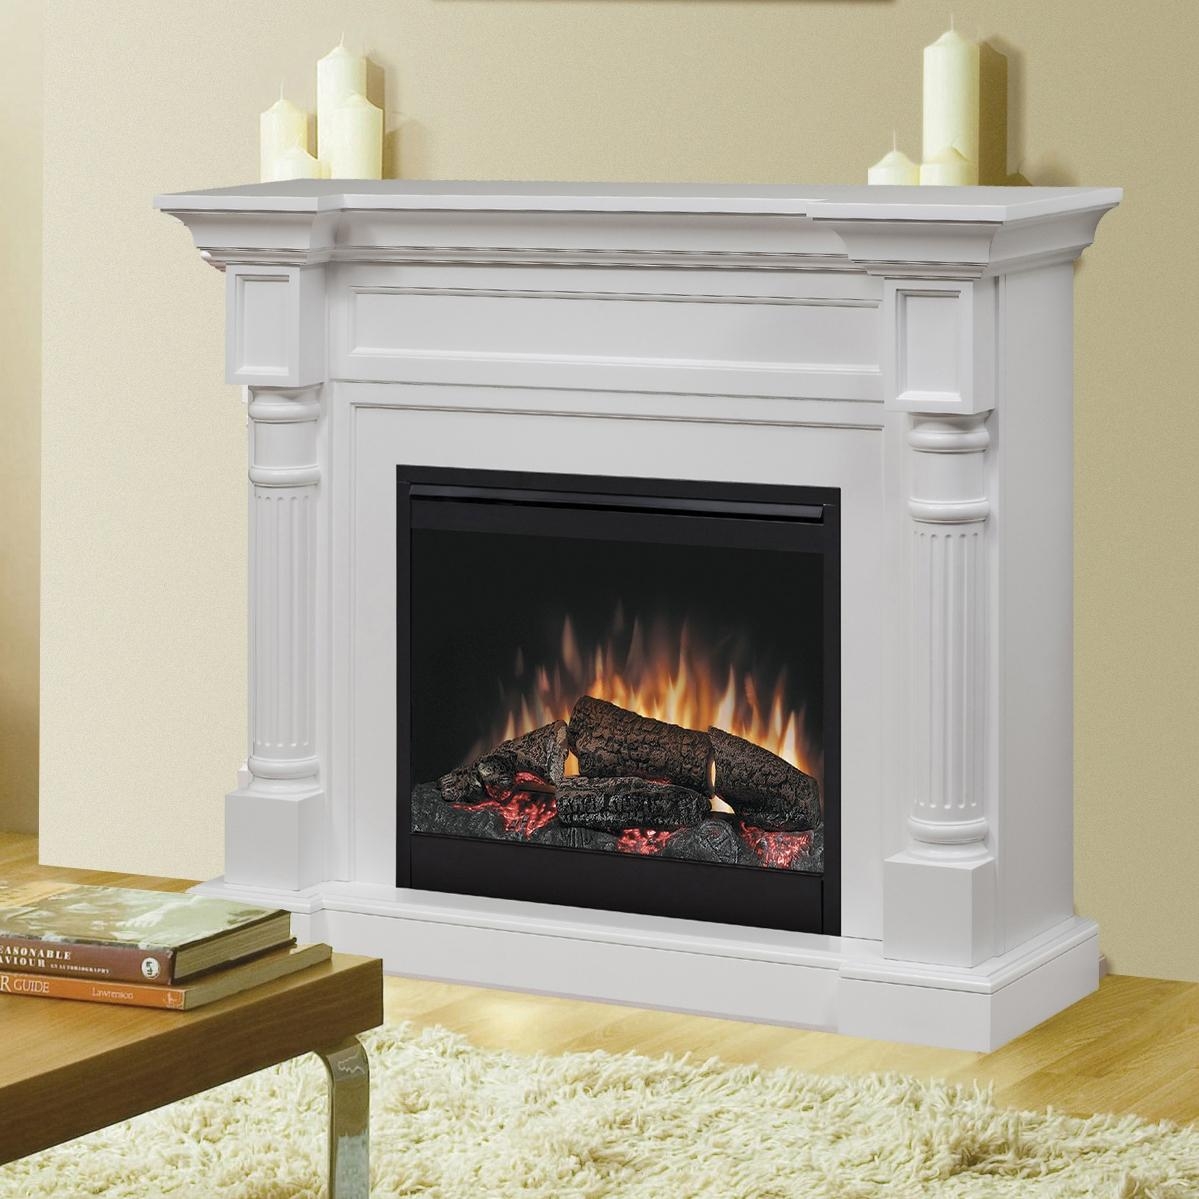 Fireplace Screens Menards Best Of 62 Electric Fireplace Charming Fireplace